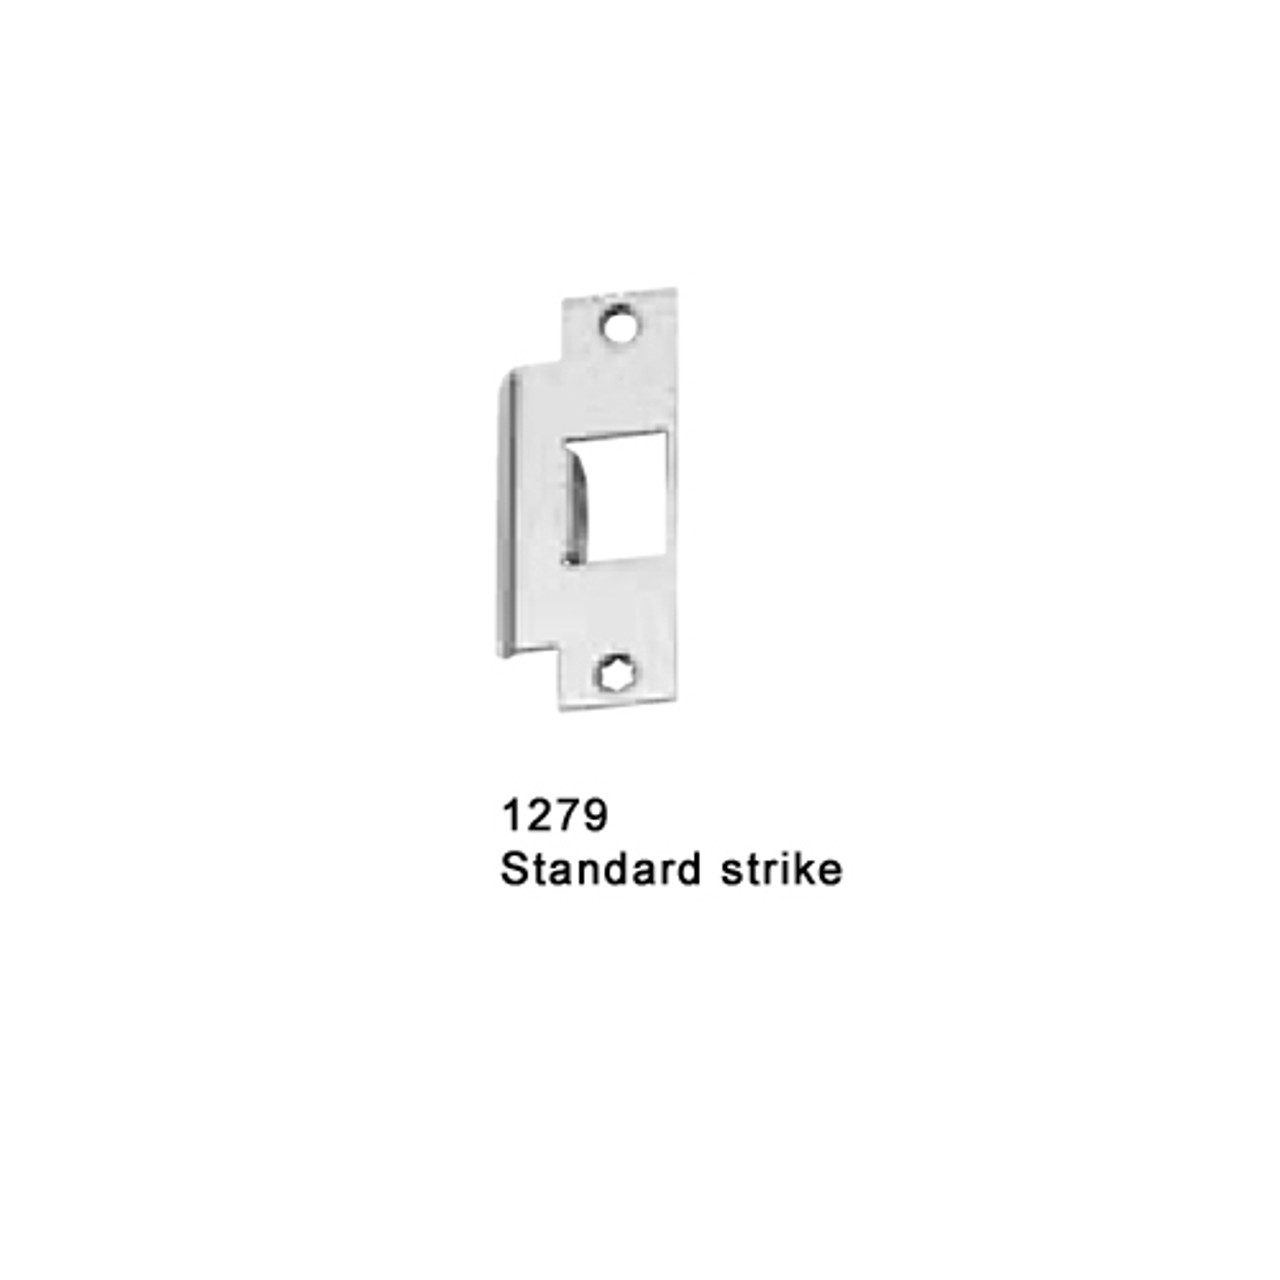 F-25-M-TP-US26-3-LHR Falcon 25 Series Fire Rated Mortise Lock Devices with 512TP Thumbpiece Trim in Polished Chrome